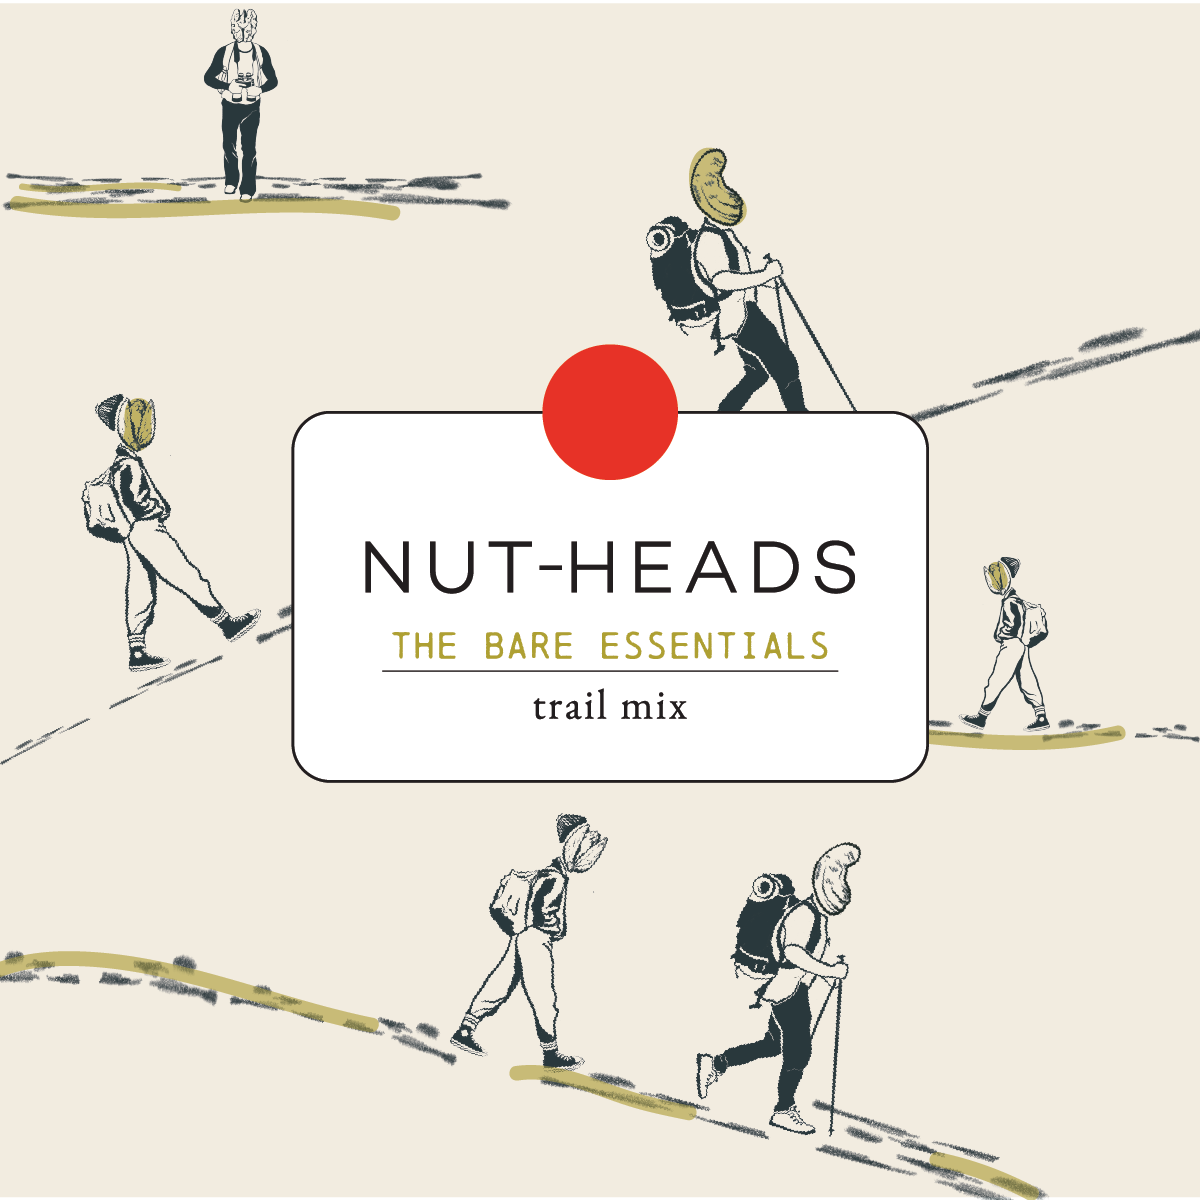 NUTHEADS PACKAGING